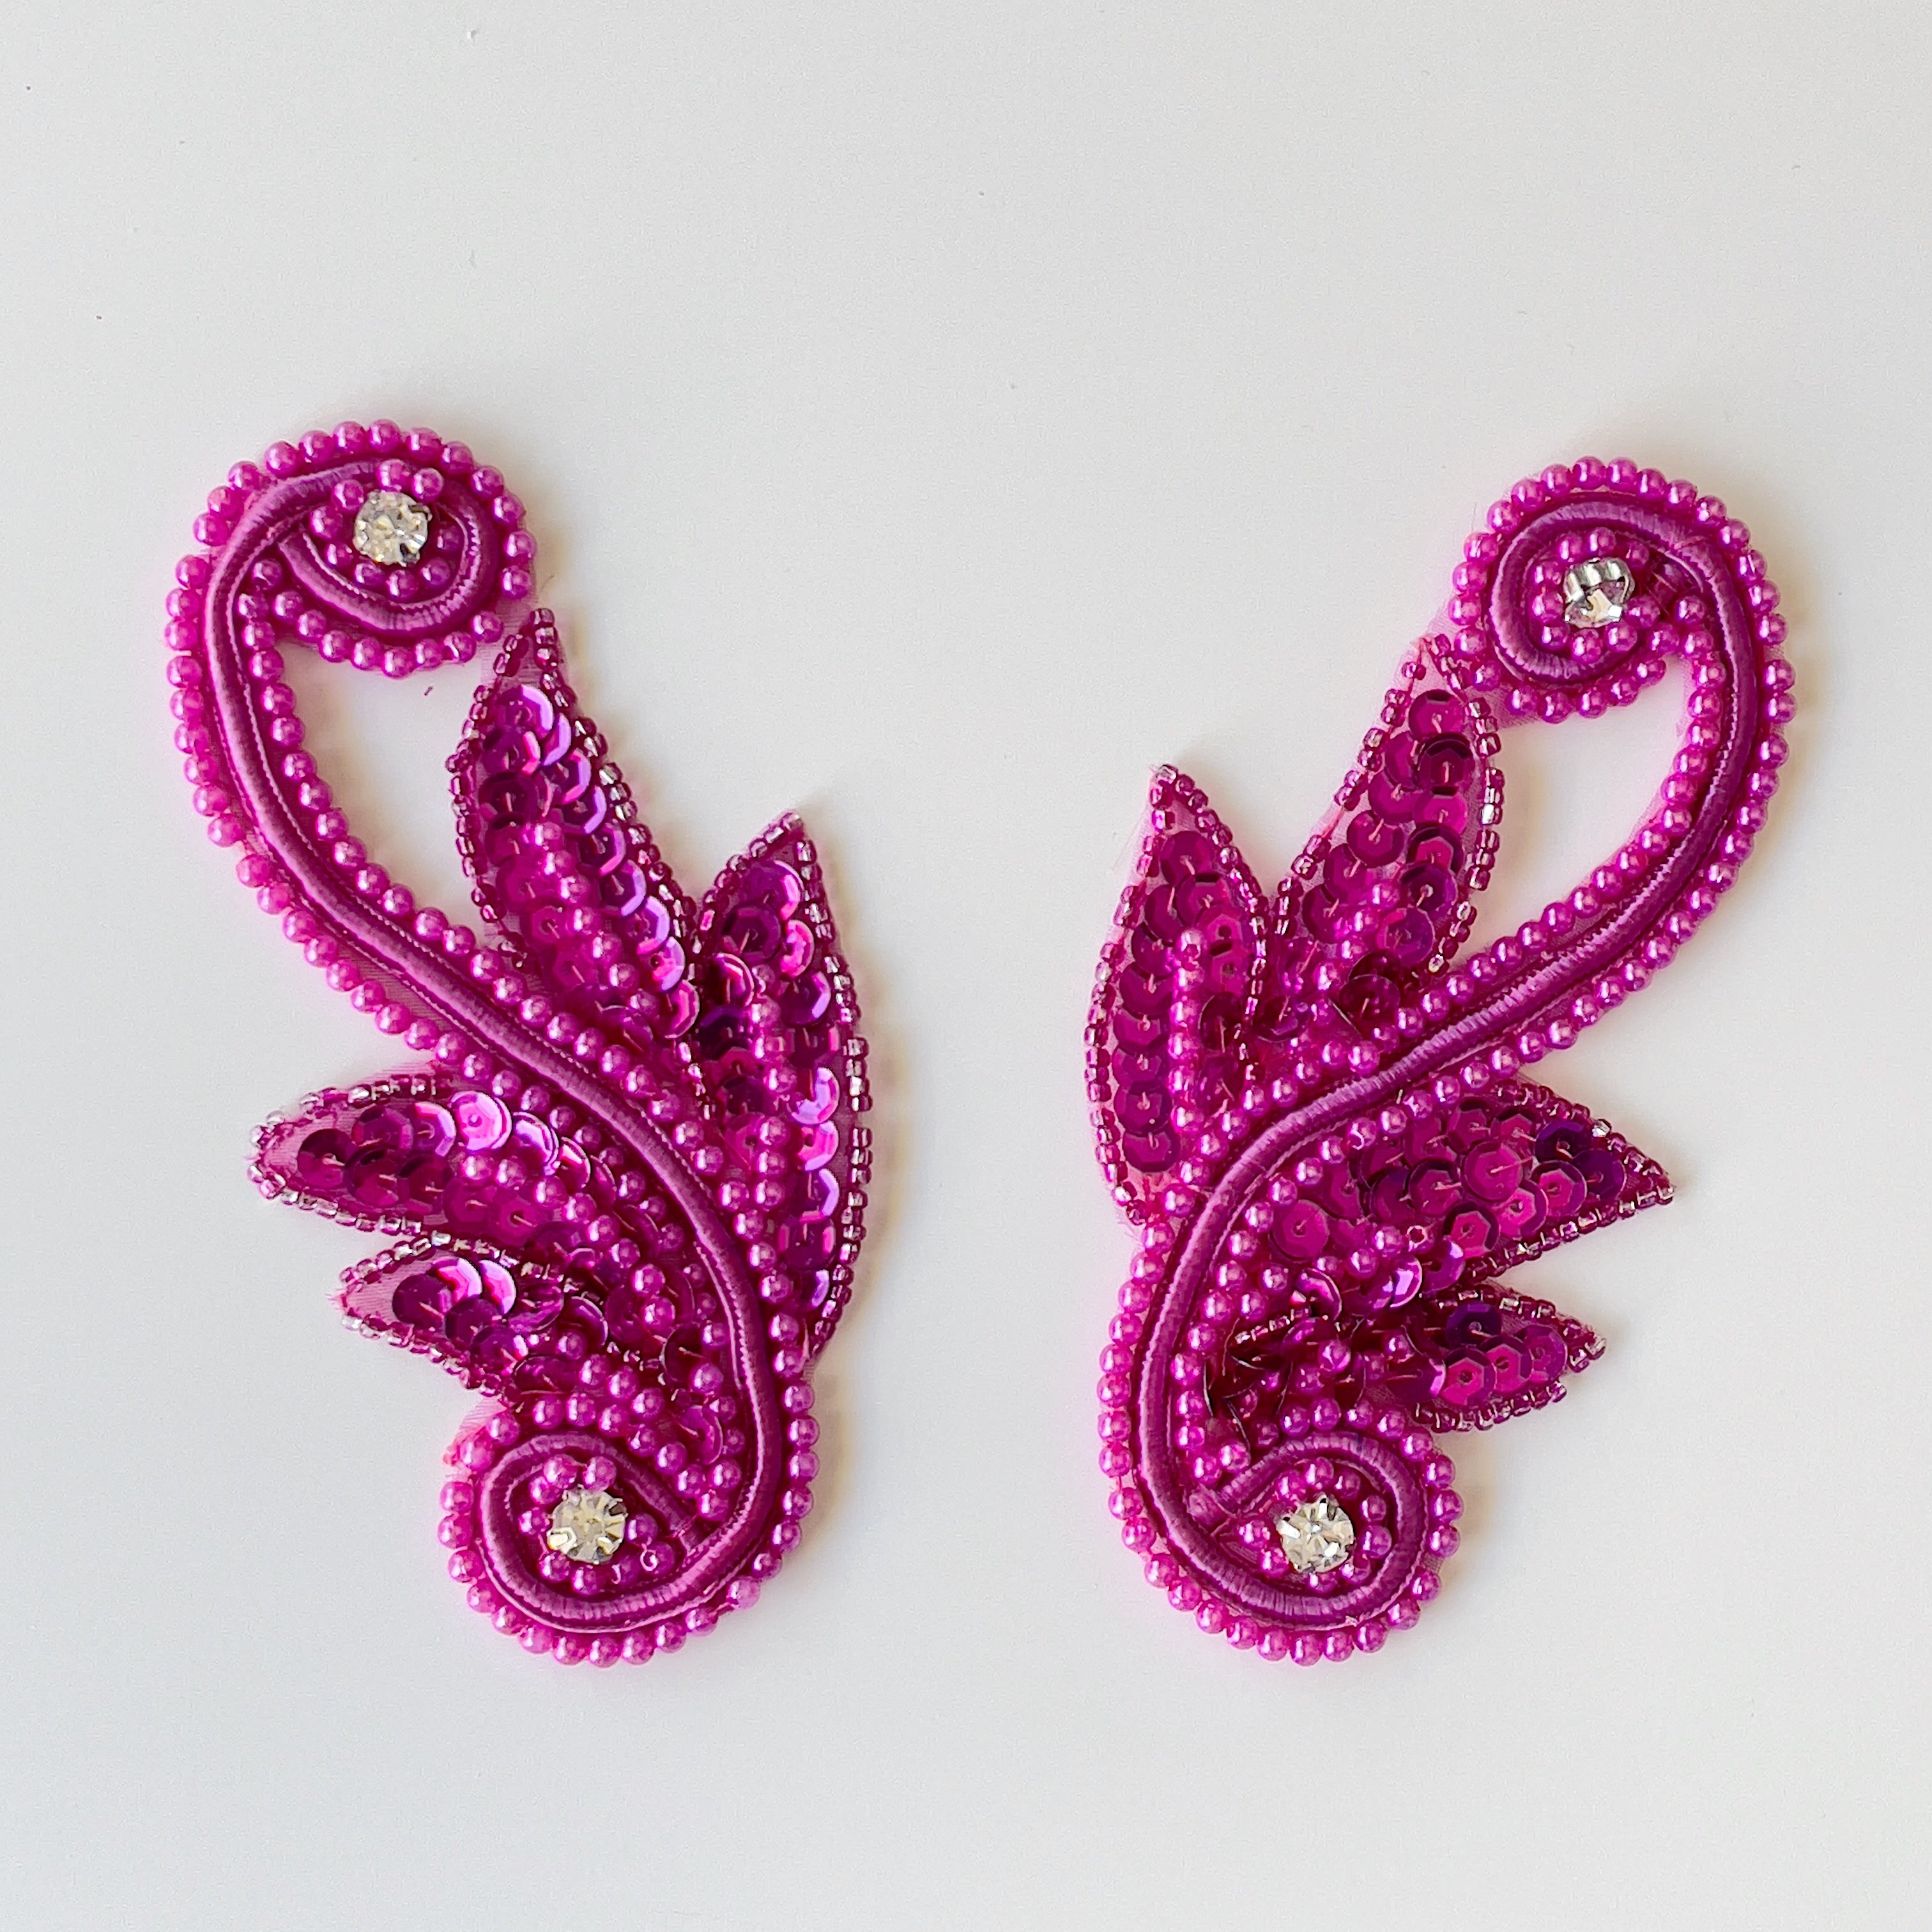 Fuchsia beaded scroll applique pair with embellished with sequins and crystal rhinestones laying flat on a white background.